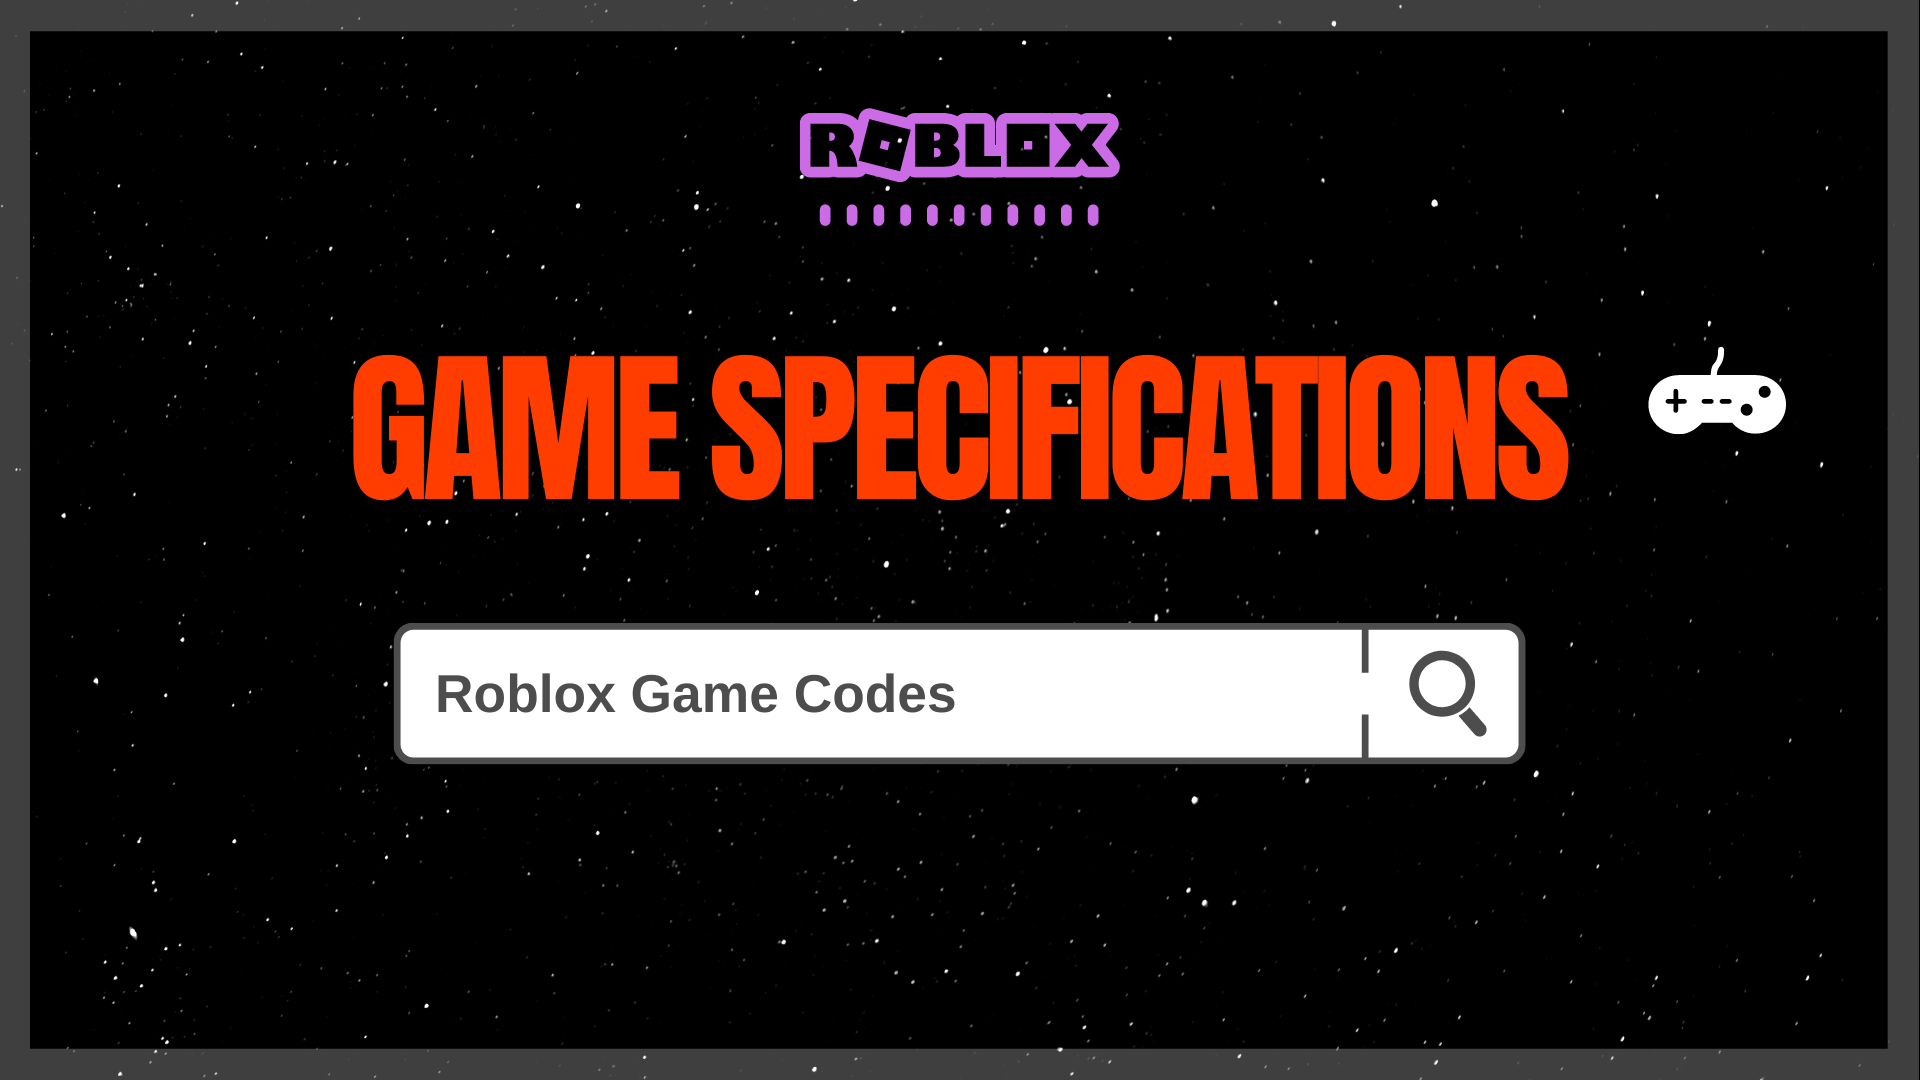 All In One Roblox Game Codes ᐈ Encylopedia Game Specifications - code for roblox fortnite battle royale tycoon